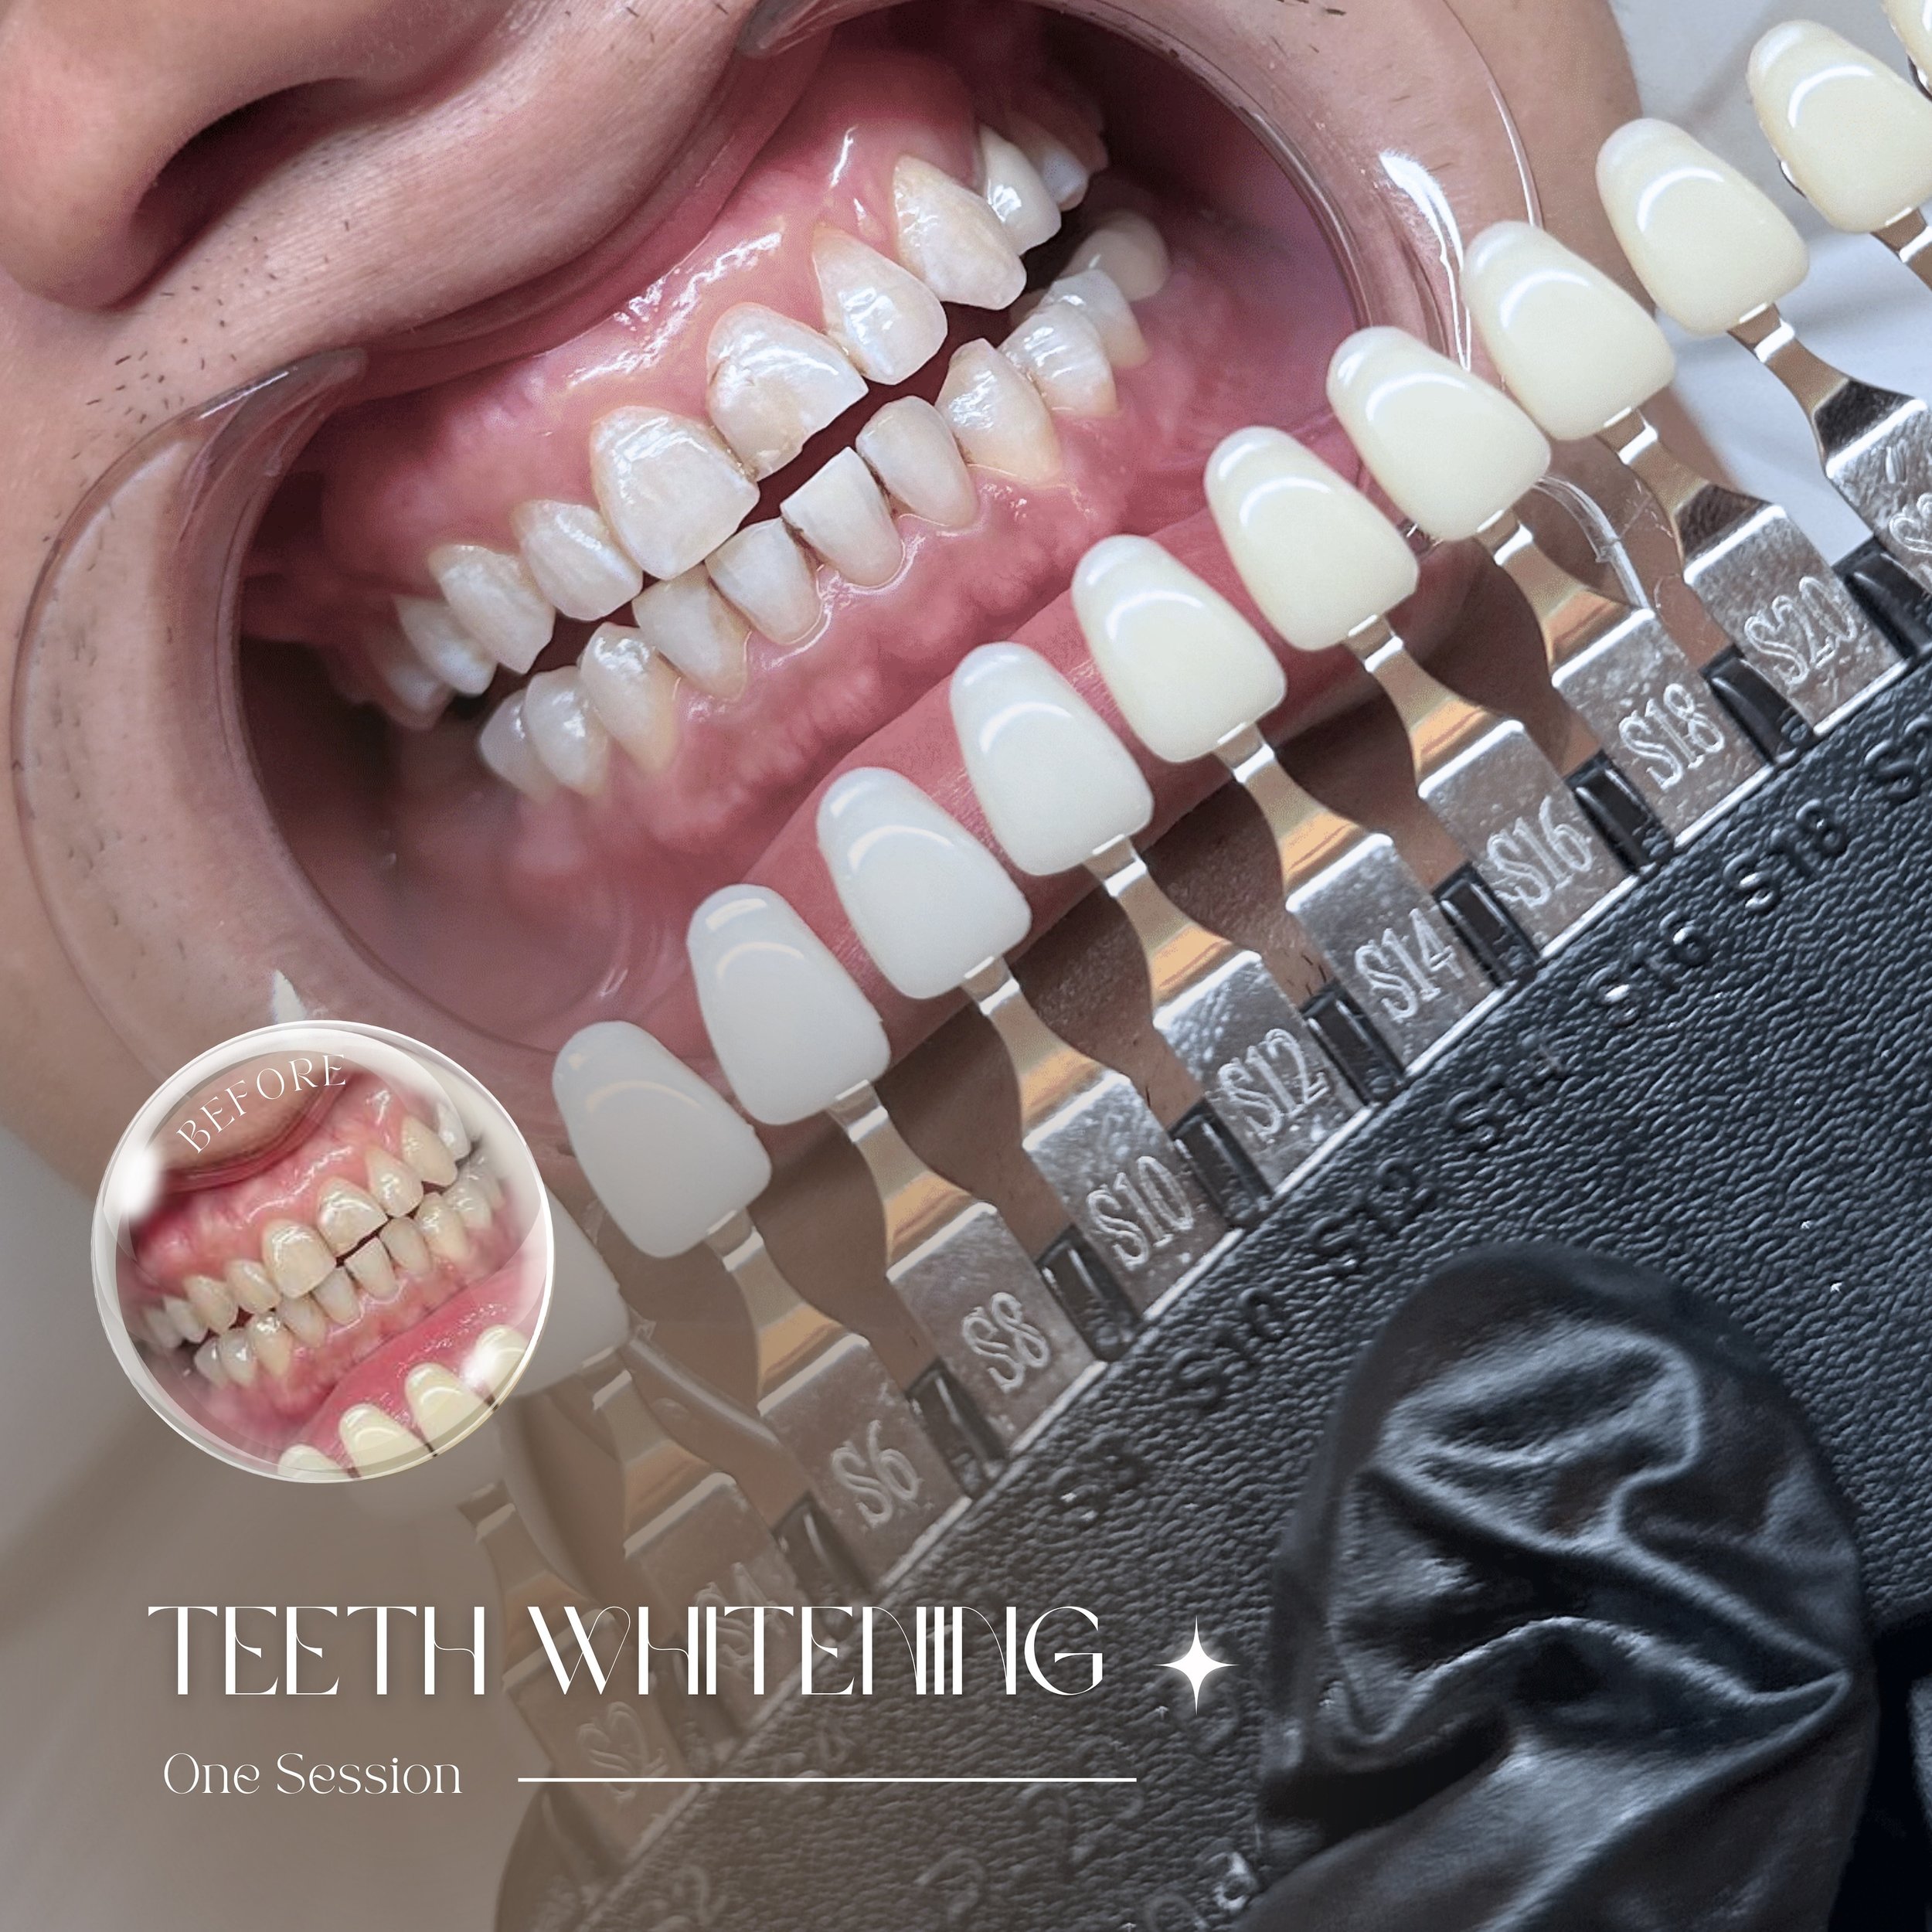 Real people, real results! 😬 Get your teeth whitened with 8 to 12 shades lighter in just 1 session! The LED light from our device greatly accelerates and enhances whitening results and reduces the side effects from whitening process. Enjoy now the n